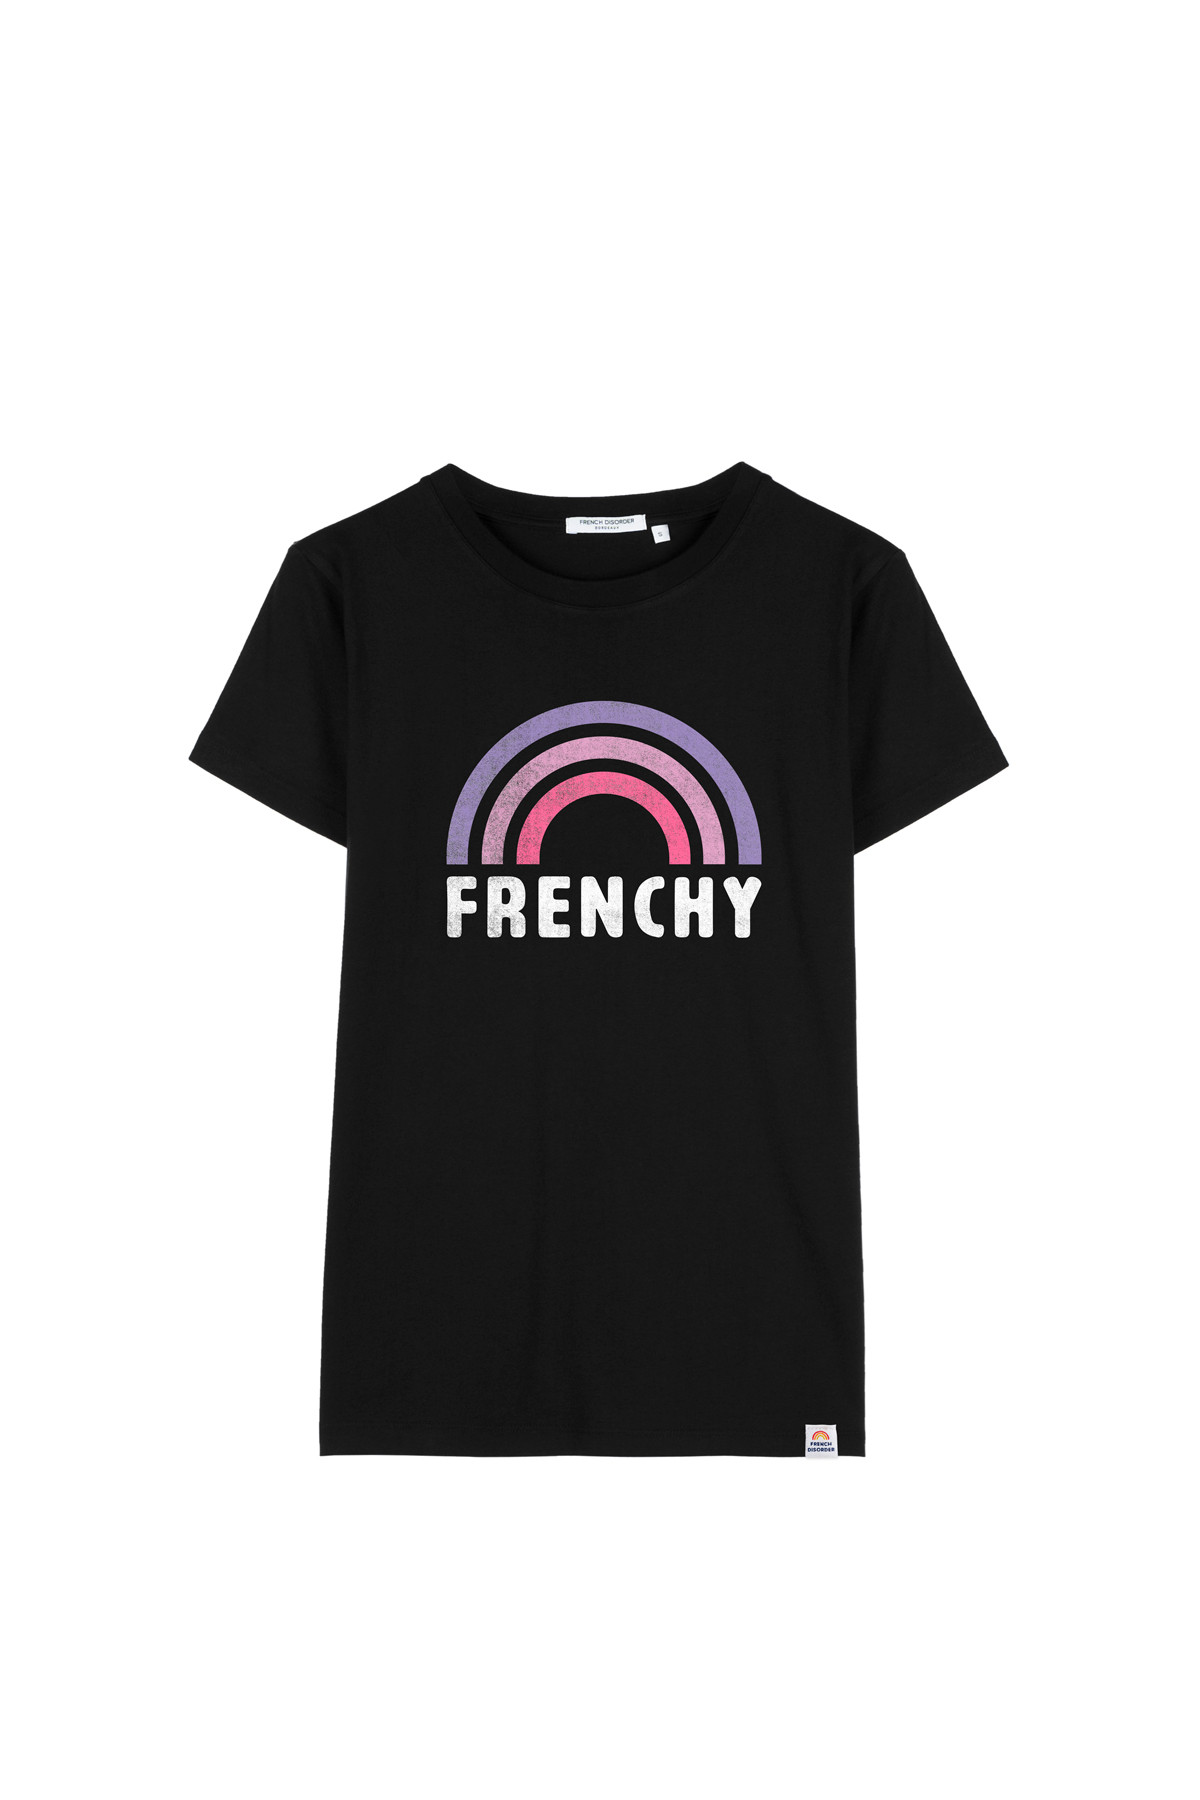 Photo de T-SHIRTS COL ROND Tshirt FRENCHY VINTAGE chez French Disorder